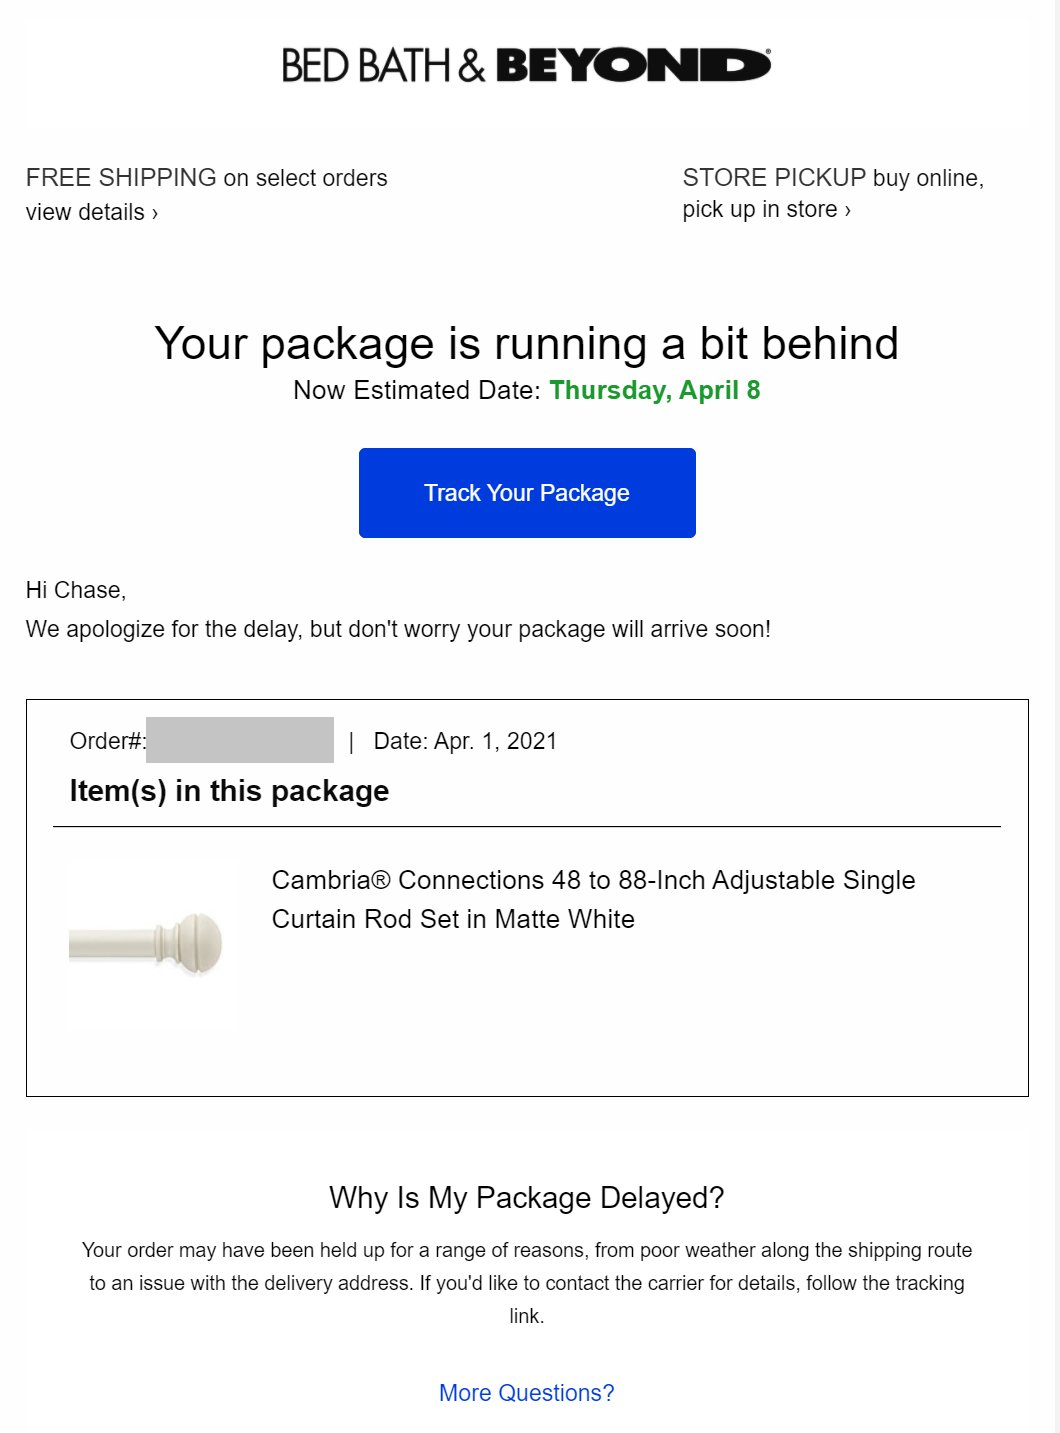 Bed Bath & Beyond Delayed Shipment Notification Industry Email Template screenshot